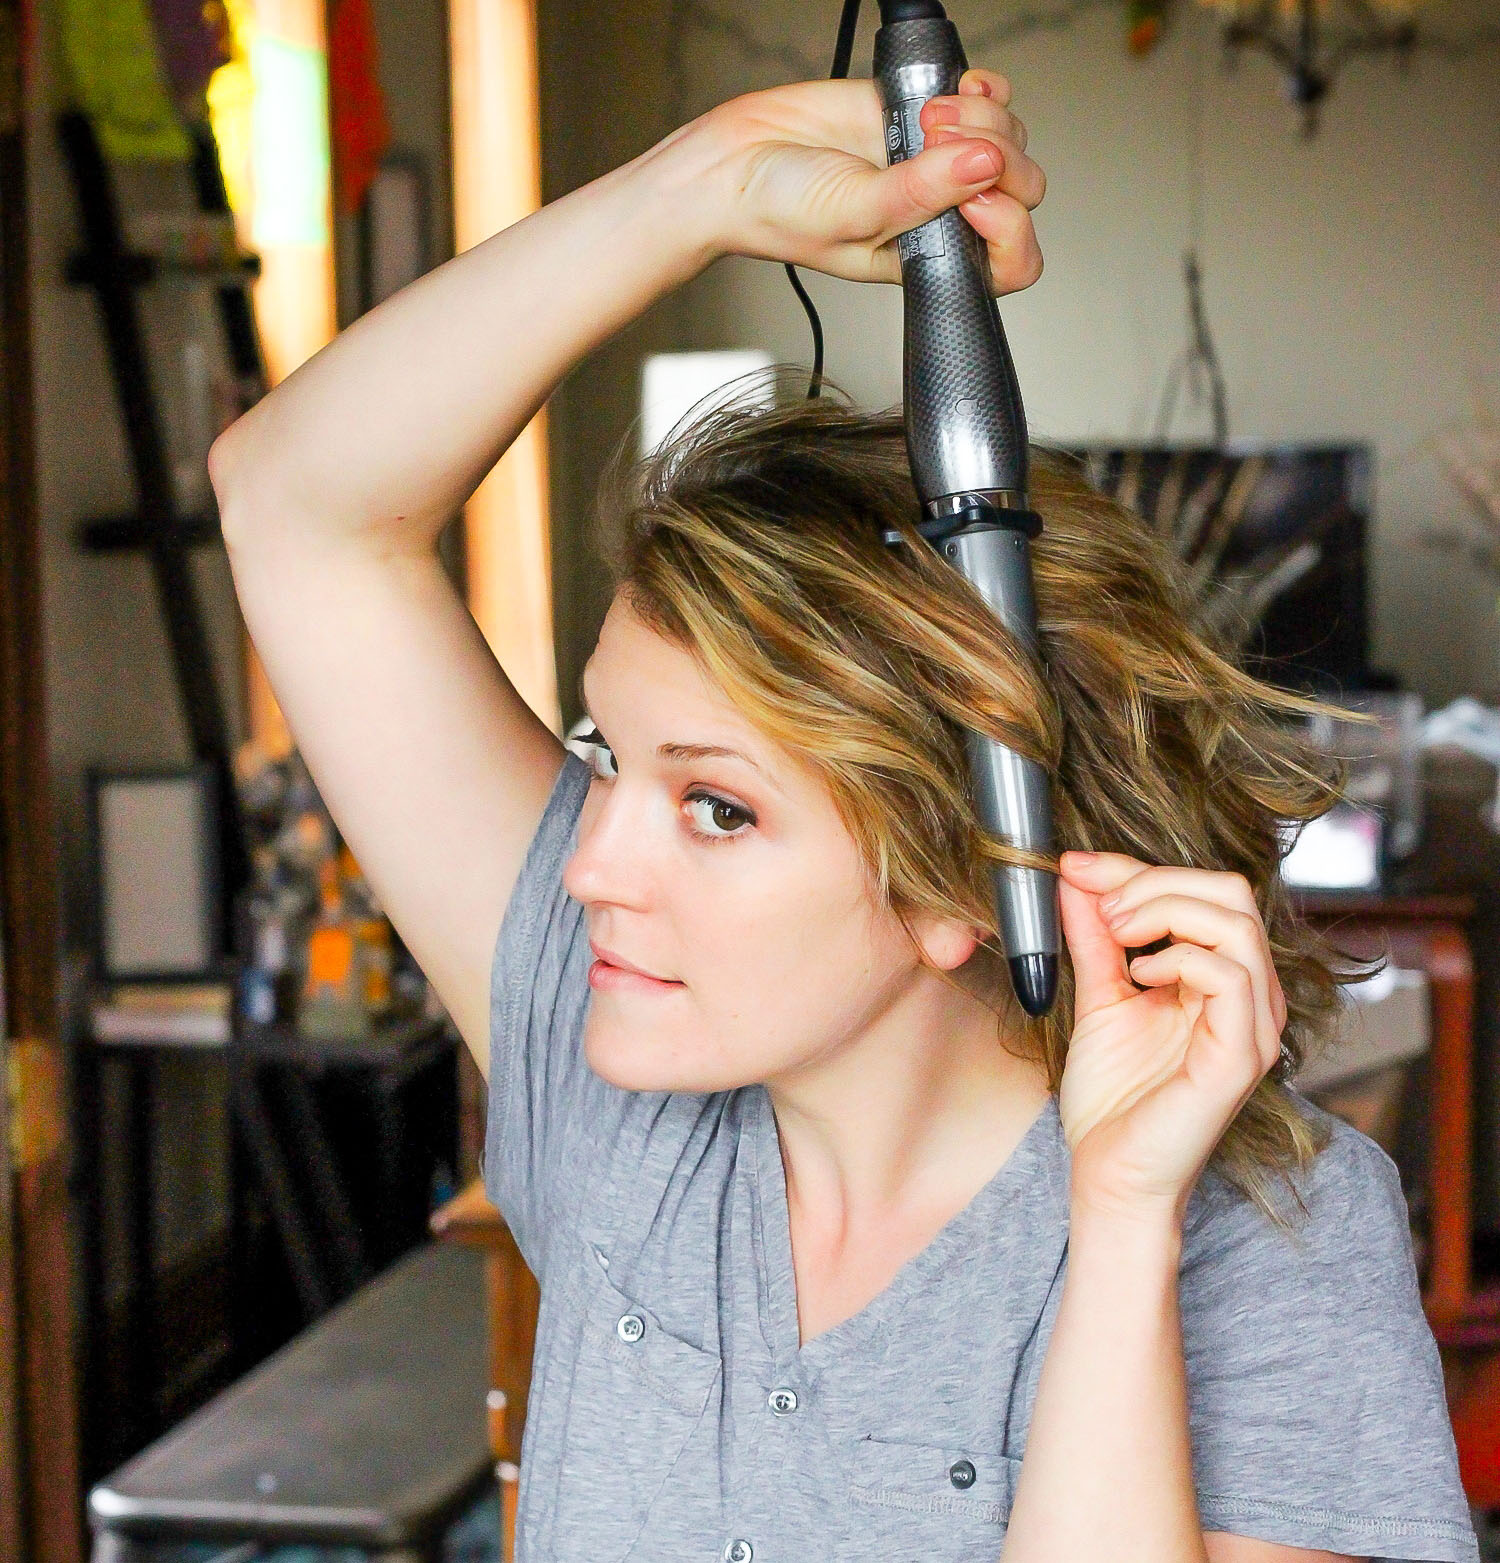 DECODING ALL THE CURLING IRONS – THERE ARE SO MANY!